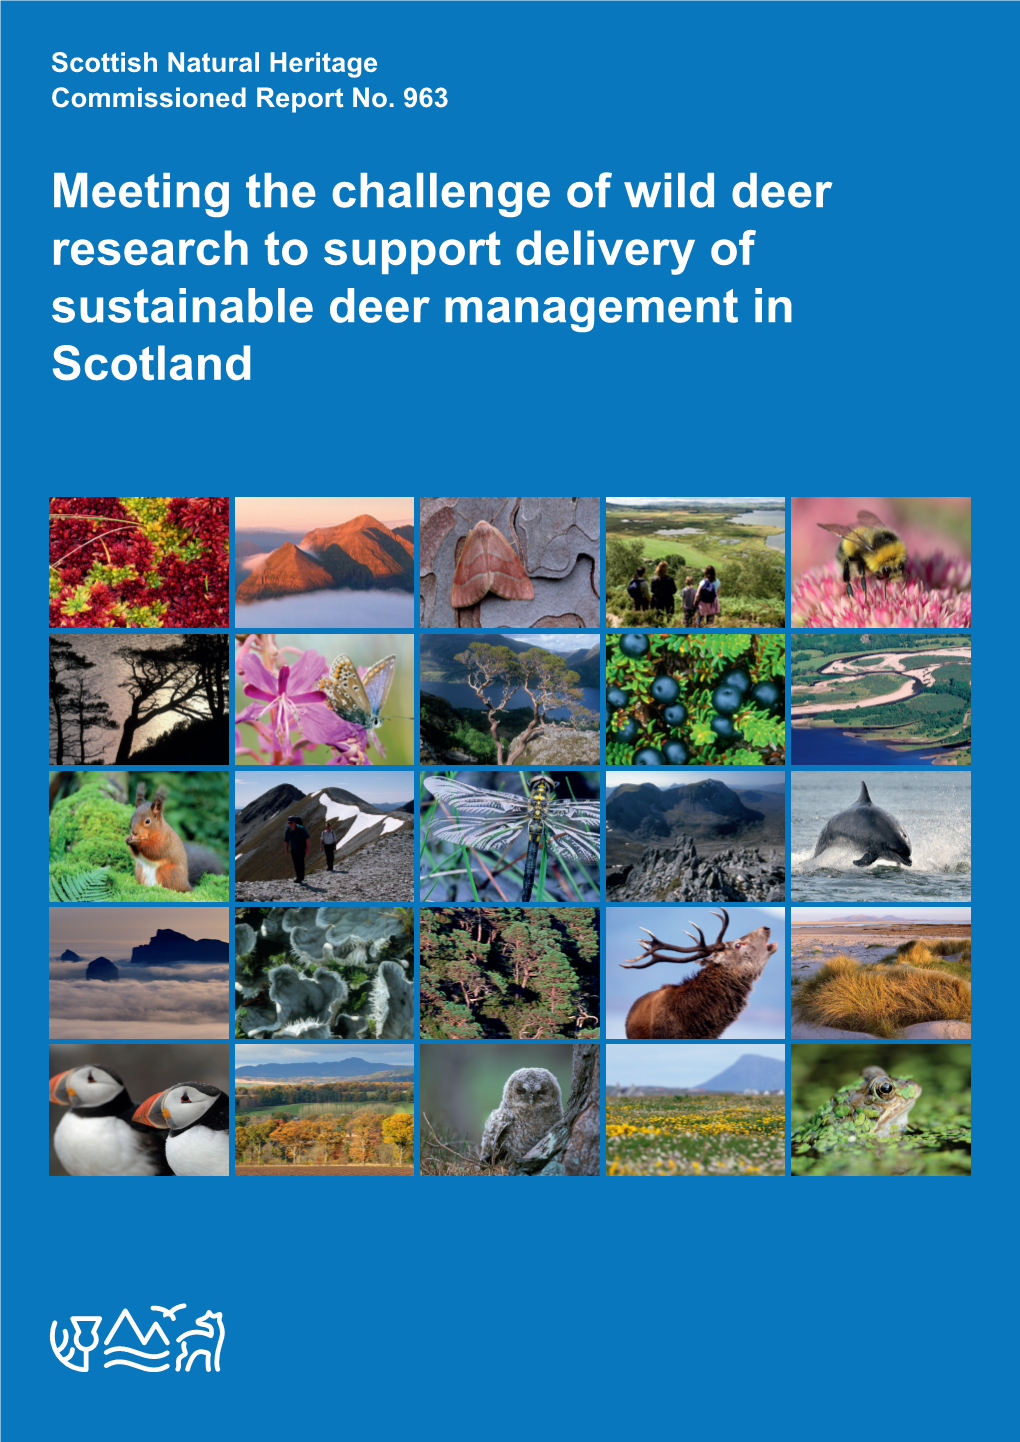 Meeting the Challenge of Wild Deer Research to Support Delivery of Sustainable Deer Management in Scotland